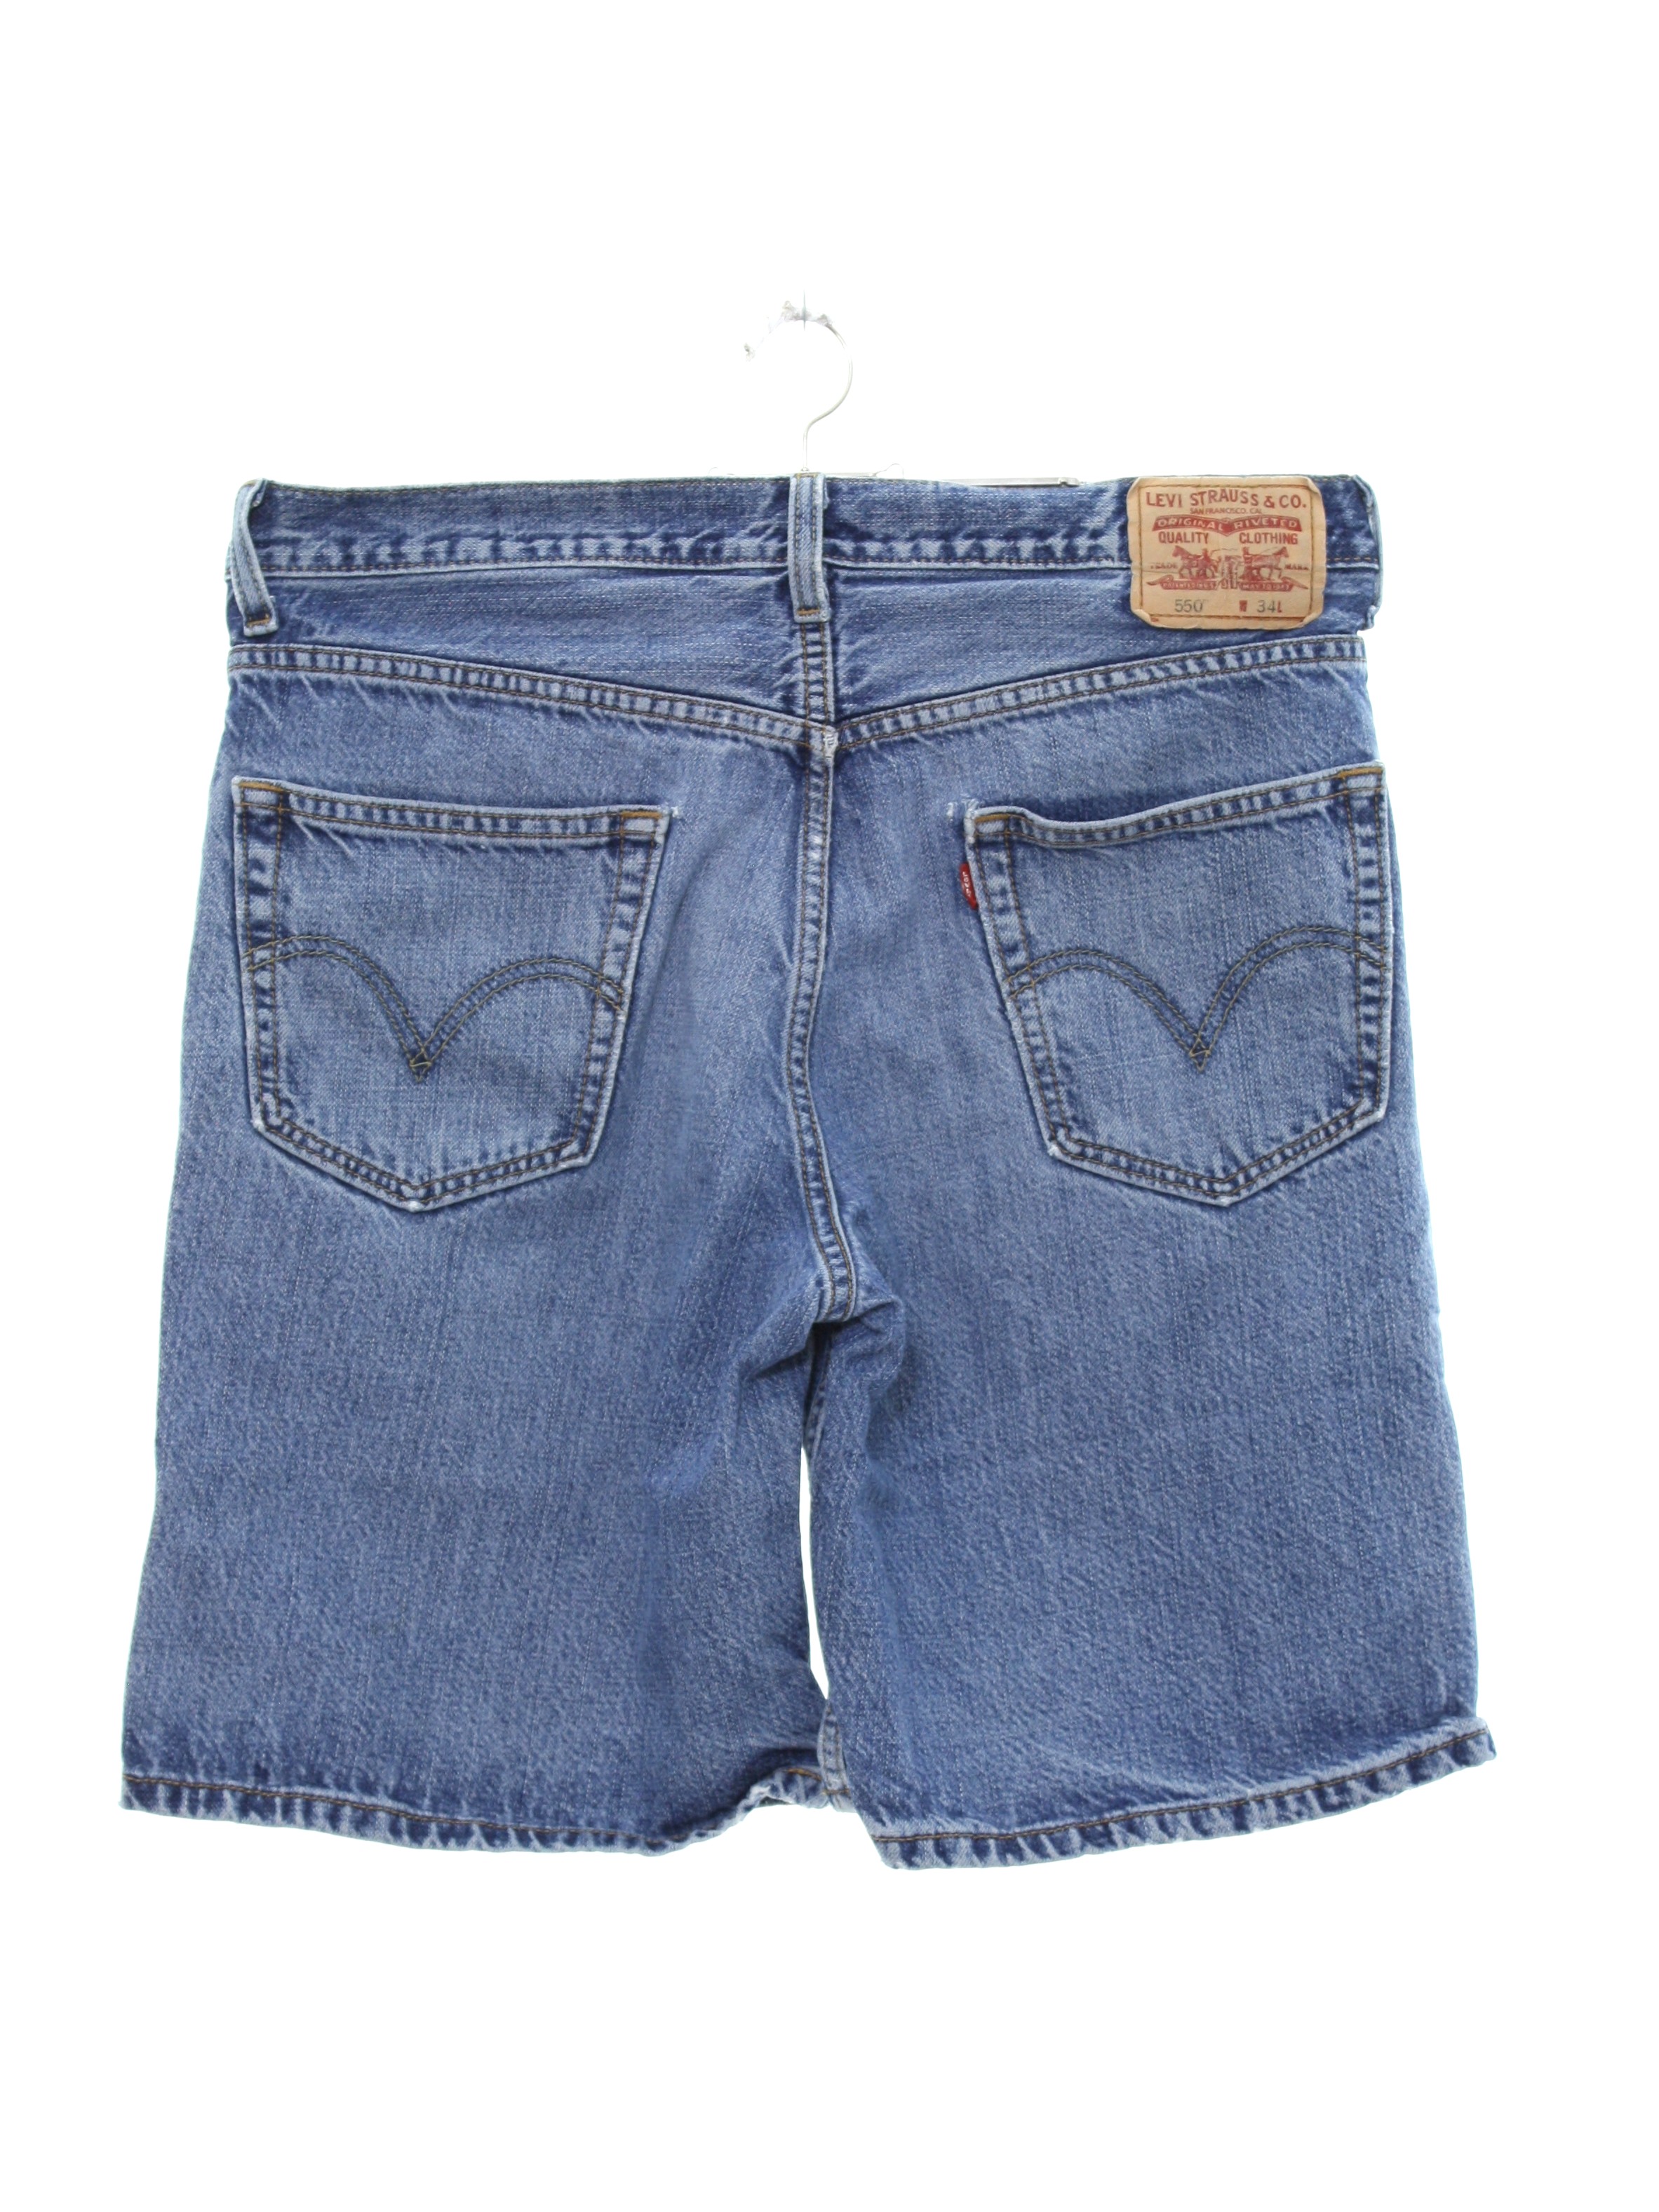 Levis 550 90's Vintage Shorts: Late 90s or Early 2000s -Levis 550- Mens  medium blue wash background cotton relaxed fit Levis 550 denim shorts.  Standard Levis style with small e red tab